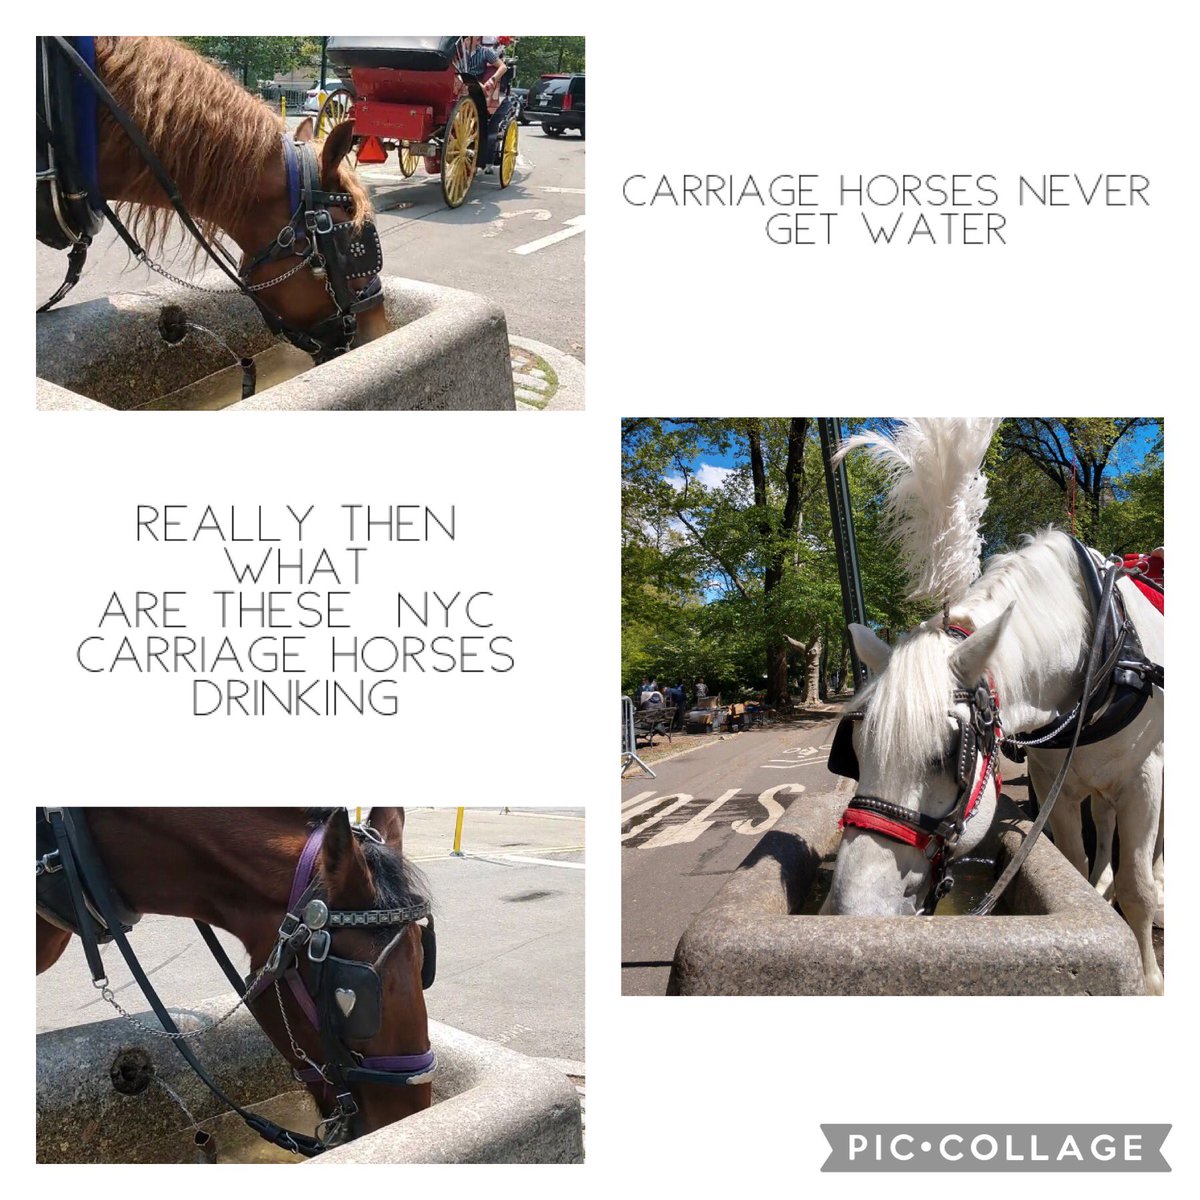 Debunking carriage horse myths part one